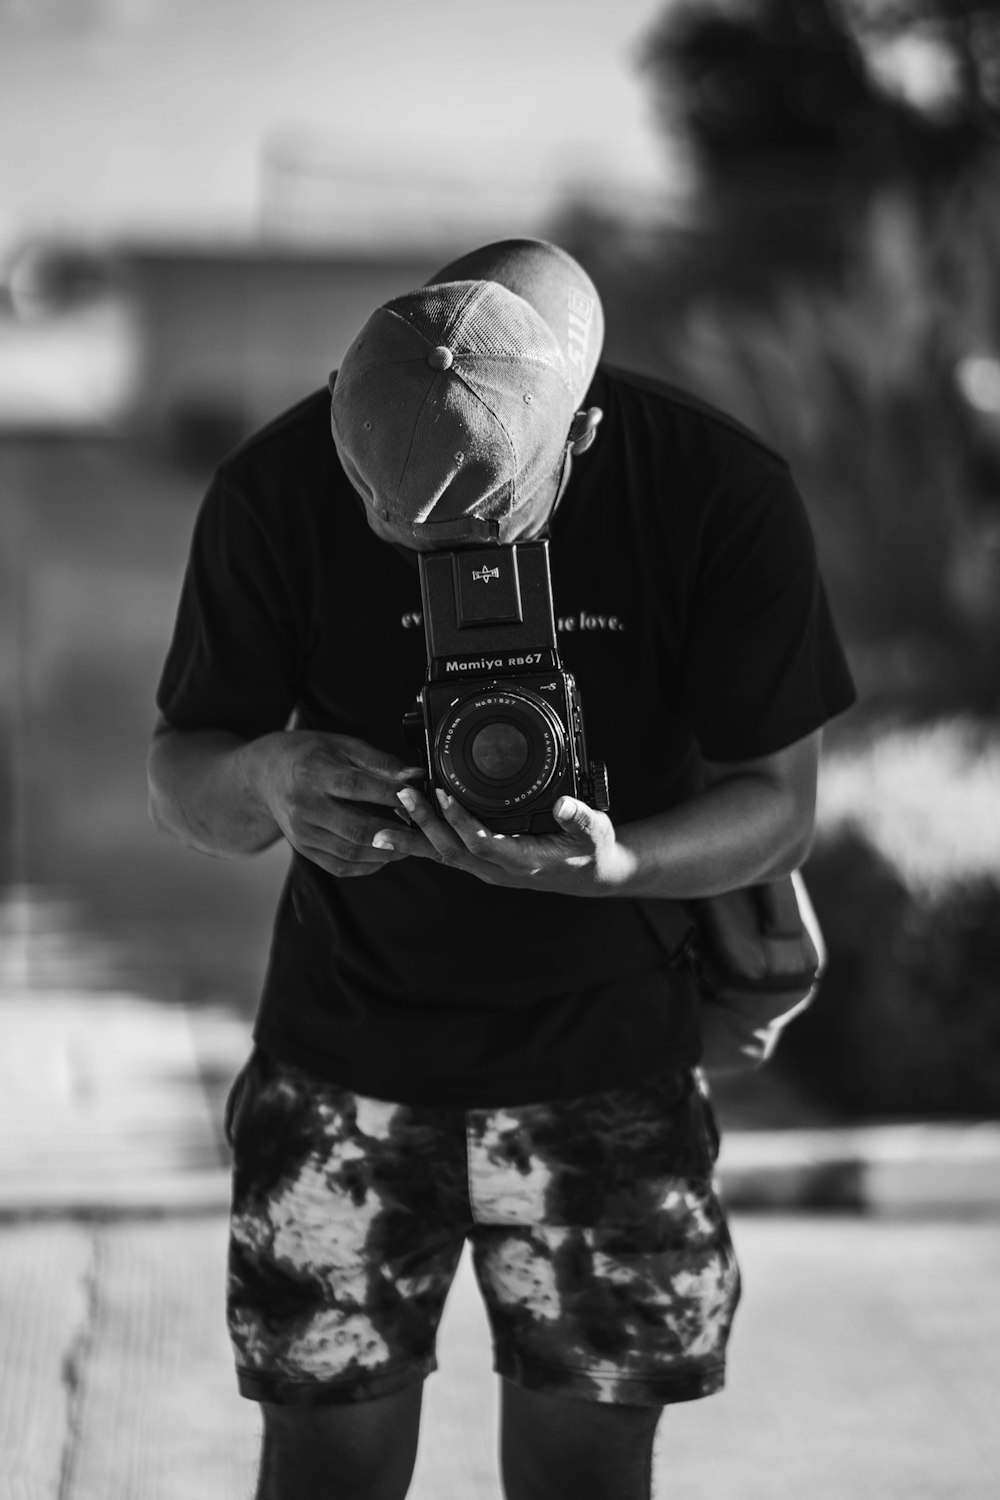 a man holding a camera while wearing a hat